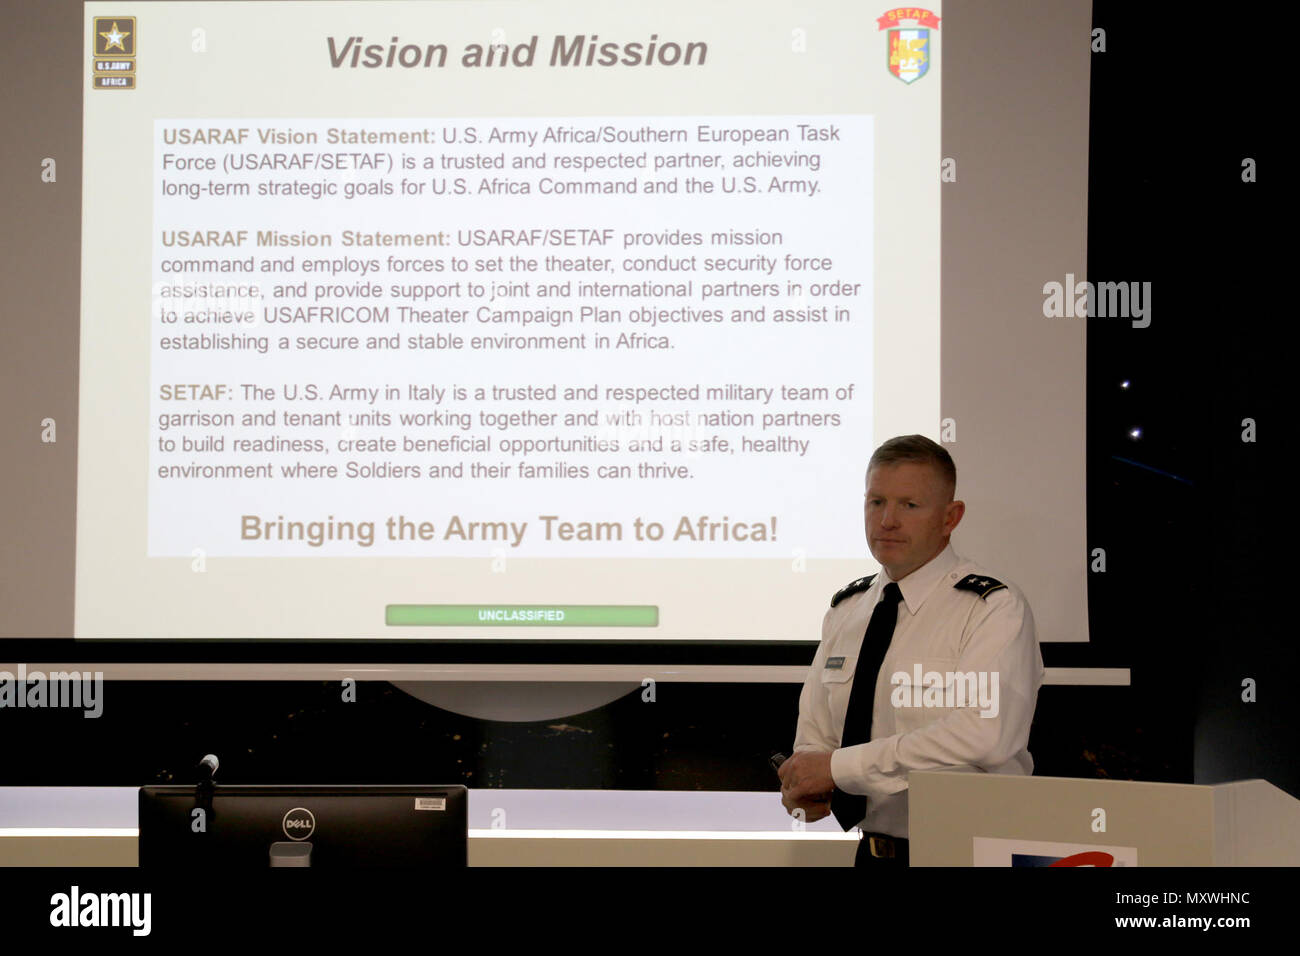 U.S. Army Africa commanding general, Maj. Gen. Joseph P. Harrington met with consulate generals from various African and European countries based in Italy Nov. 30, 2016 to discuss the role of USARAF on the African Continent and the continued friendship with Italy.  The meeting, hosted by Consulate General Milan Philip Reeker, was designed to give a better insight of USARAF missions to key African partners and European allies within the U.S. Consulate Milan Region.(U.S. Army photograph by Sgt. 1st Class Chris Bridson, U.S. Army Africa Public Affairs.) Stock Photo